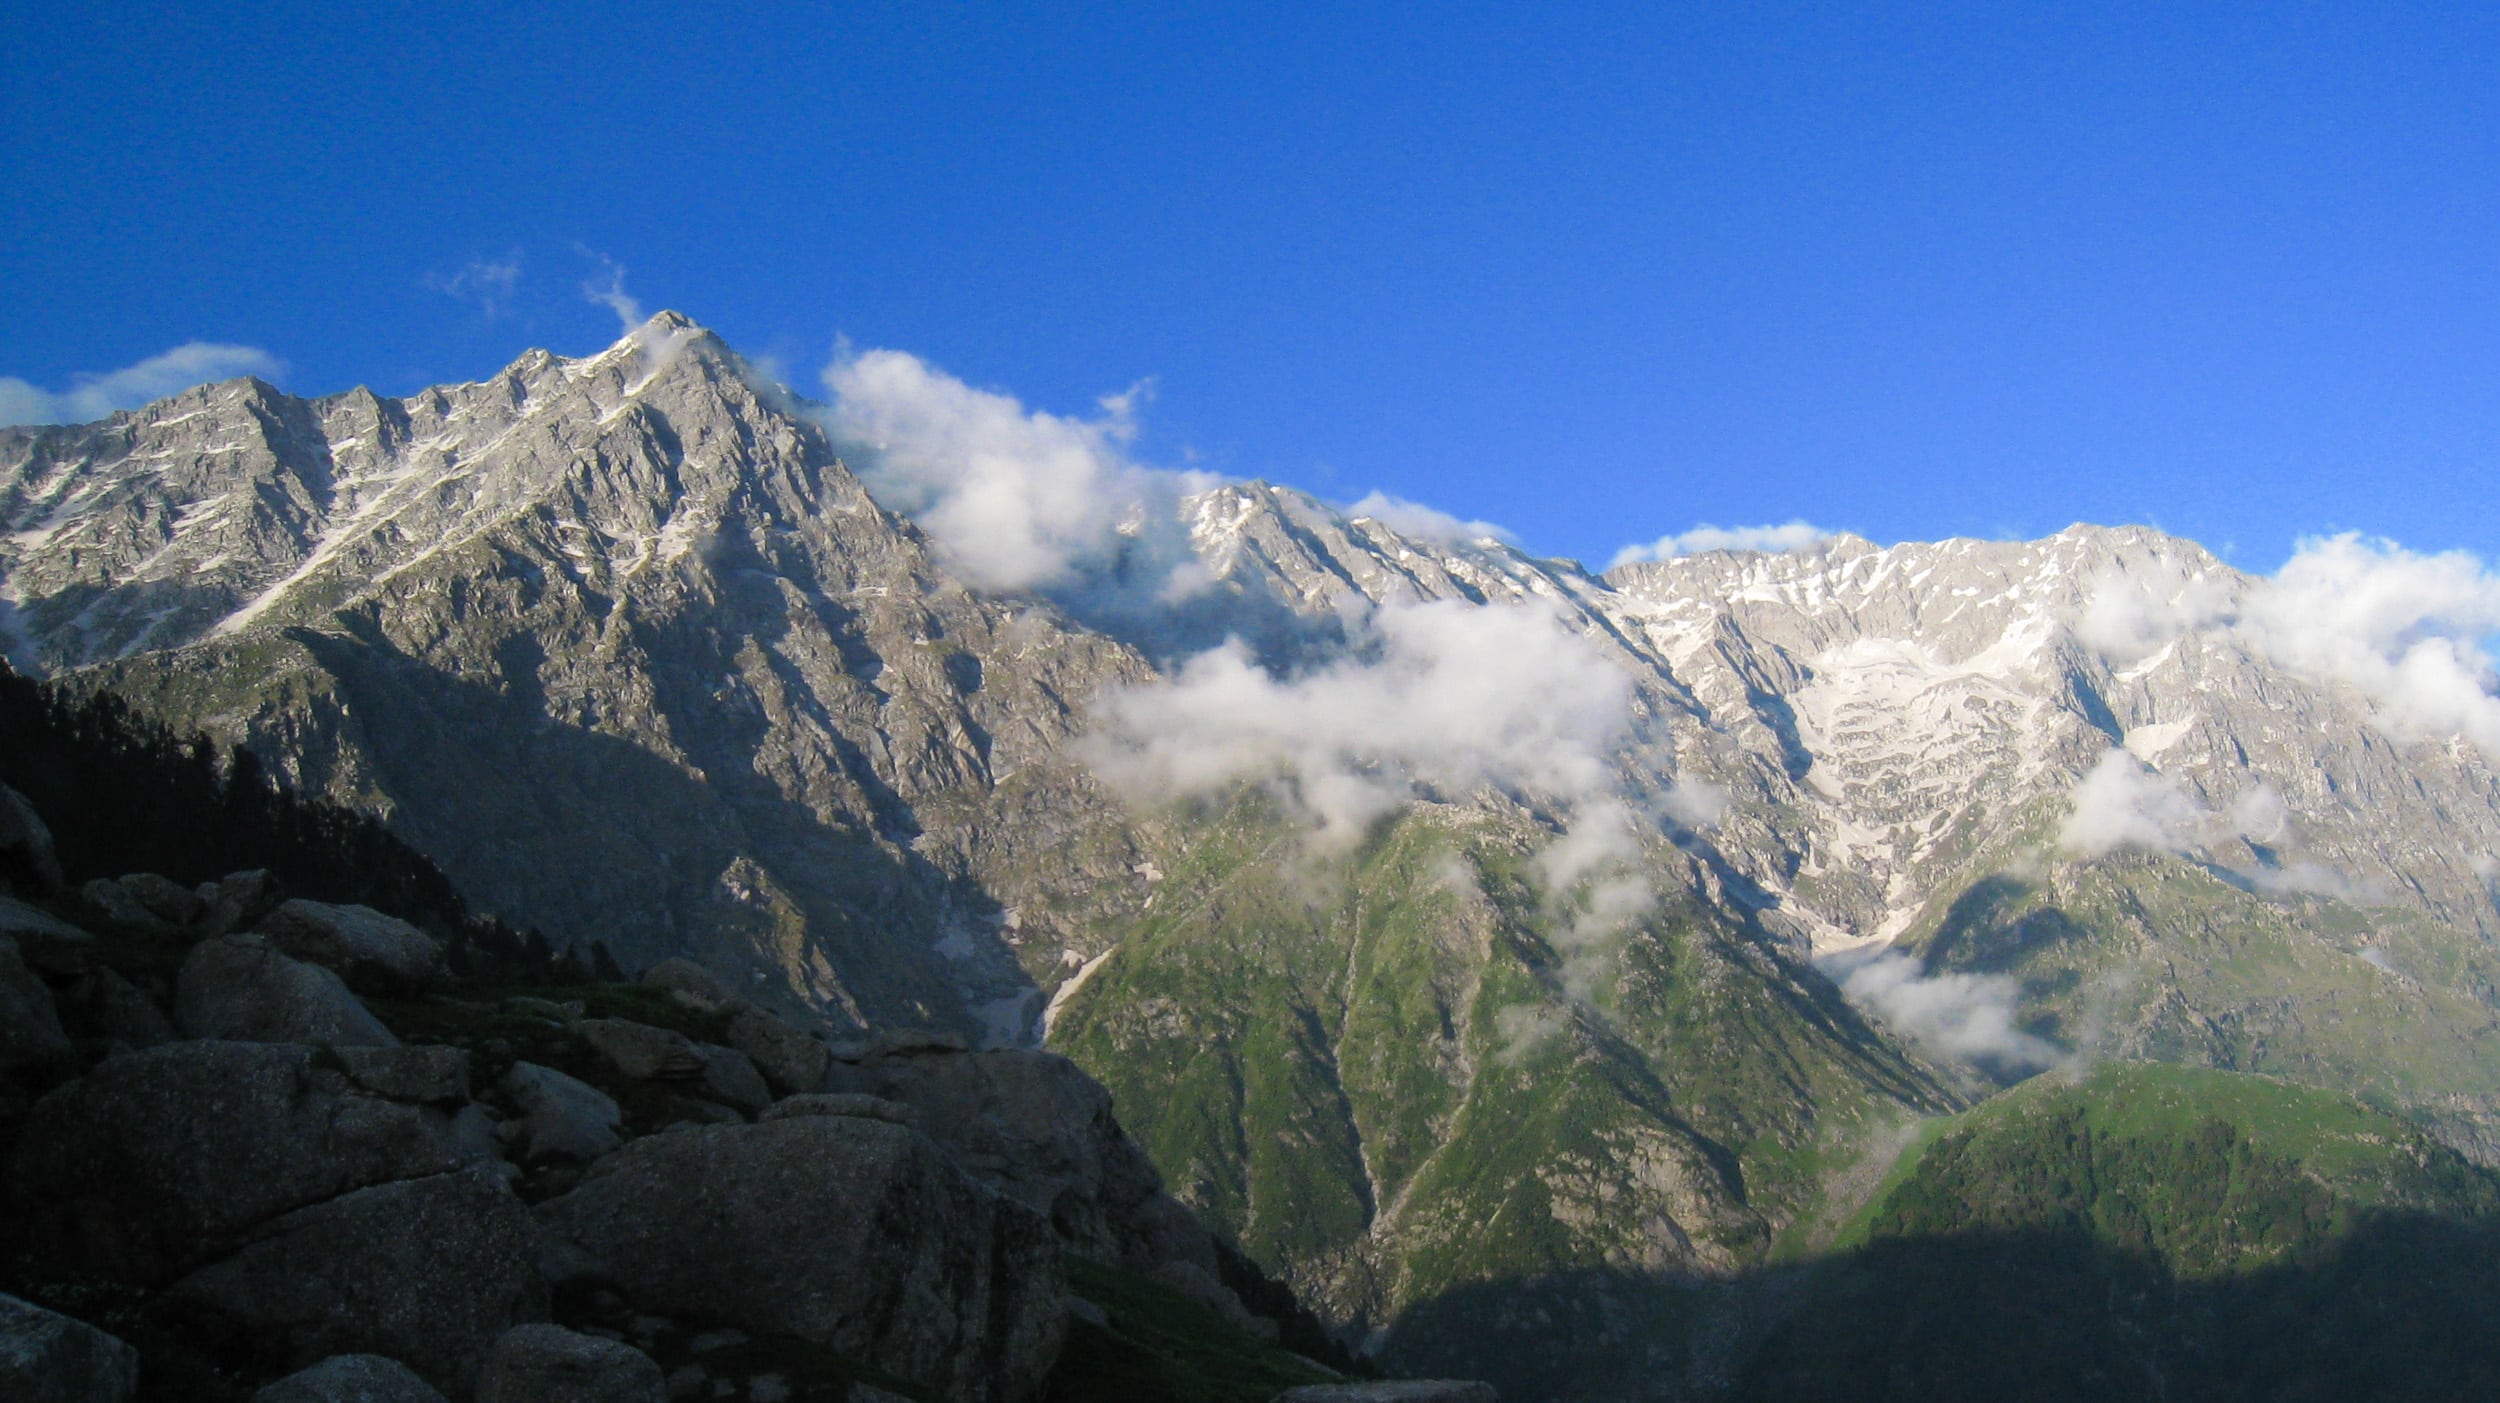 Indrahar Pass (left of the peak) in northern India